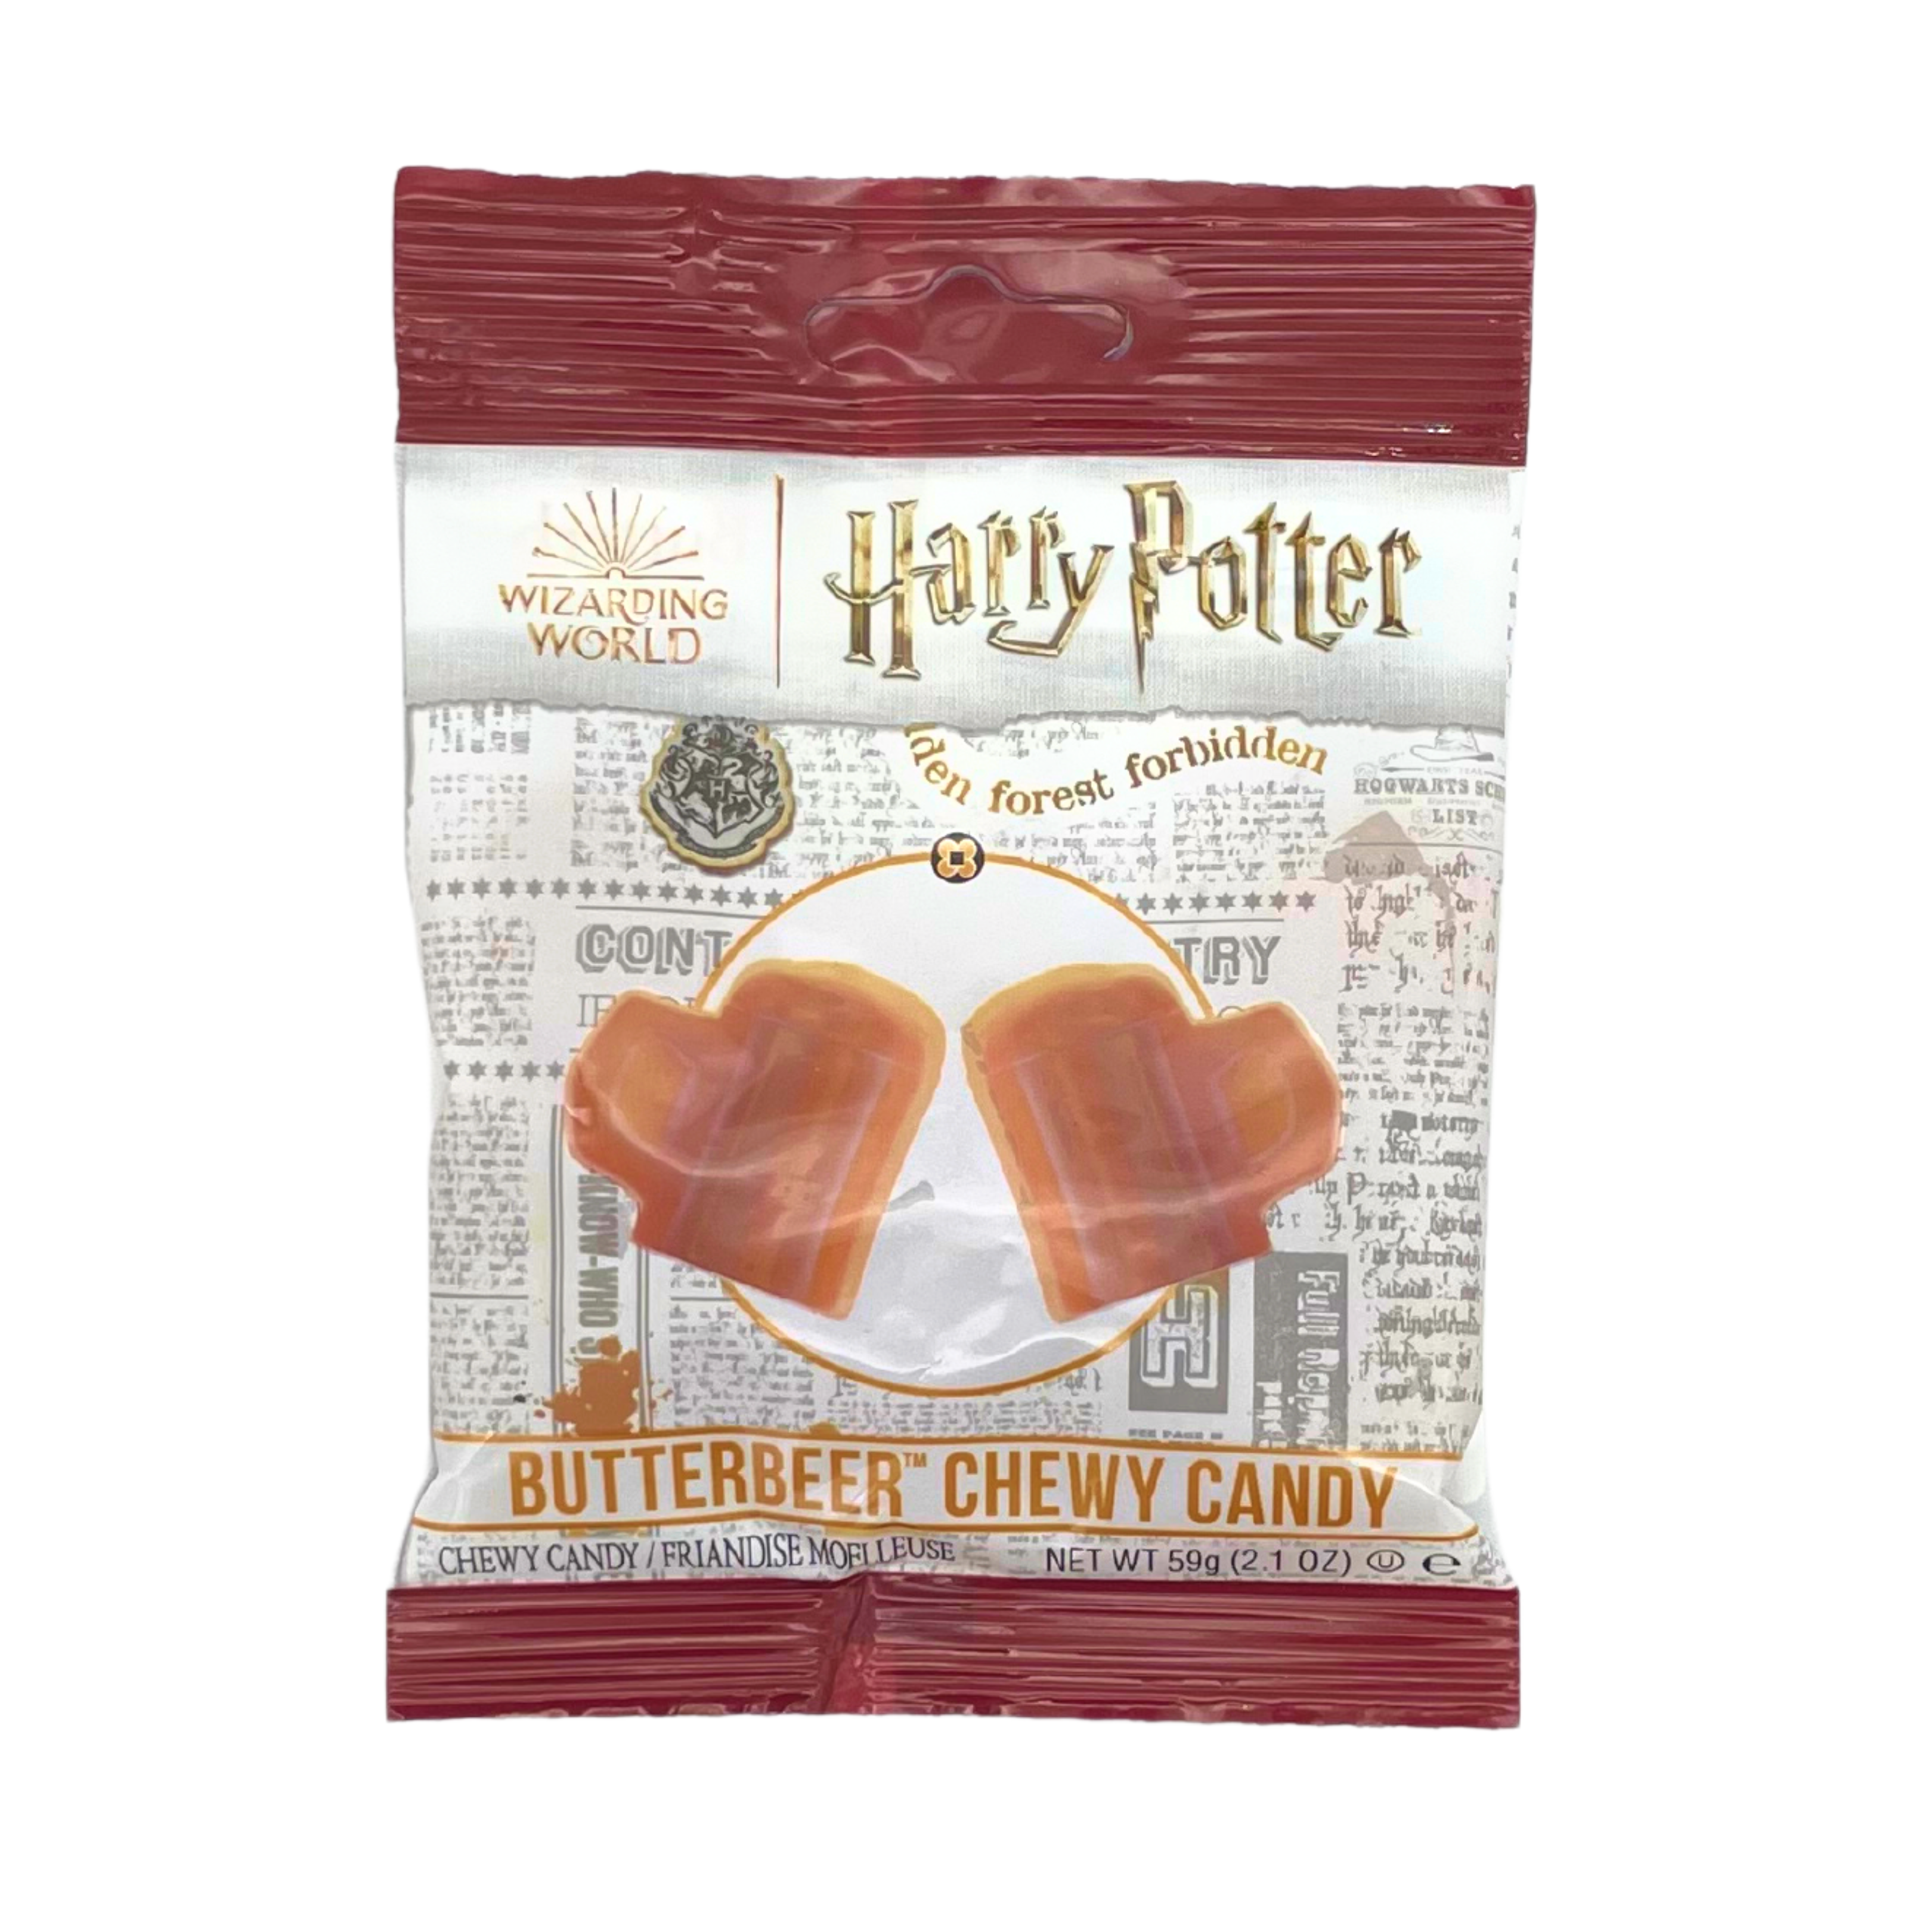 Jelly Belly - Harry Potter Butterbeer Chewy Candy - Caramelle al gusto –  Acquista Online al Miglior Prezzo - Fit or Fat Market